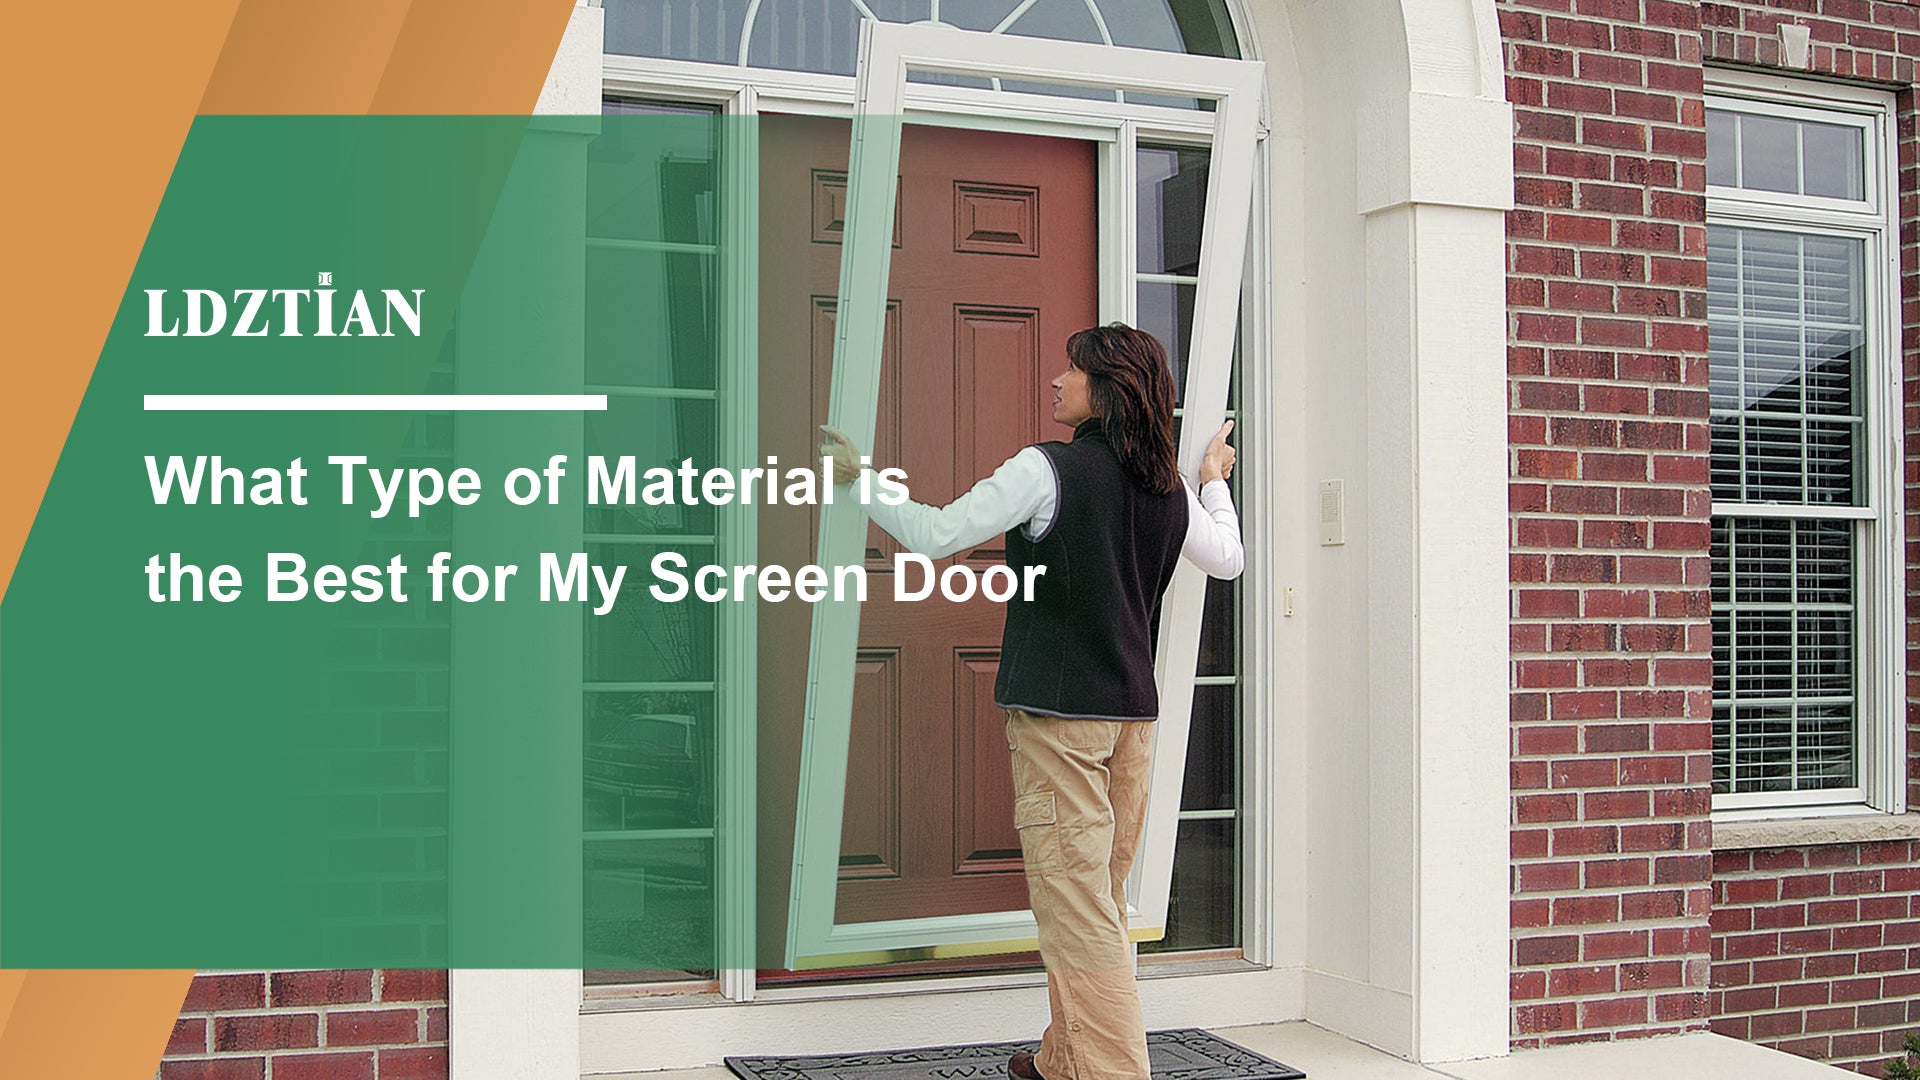 What Type of Material is the Best for My Screen Door?